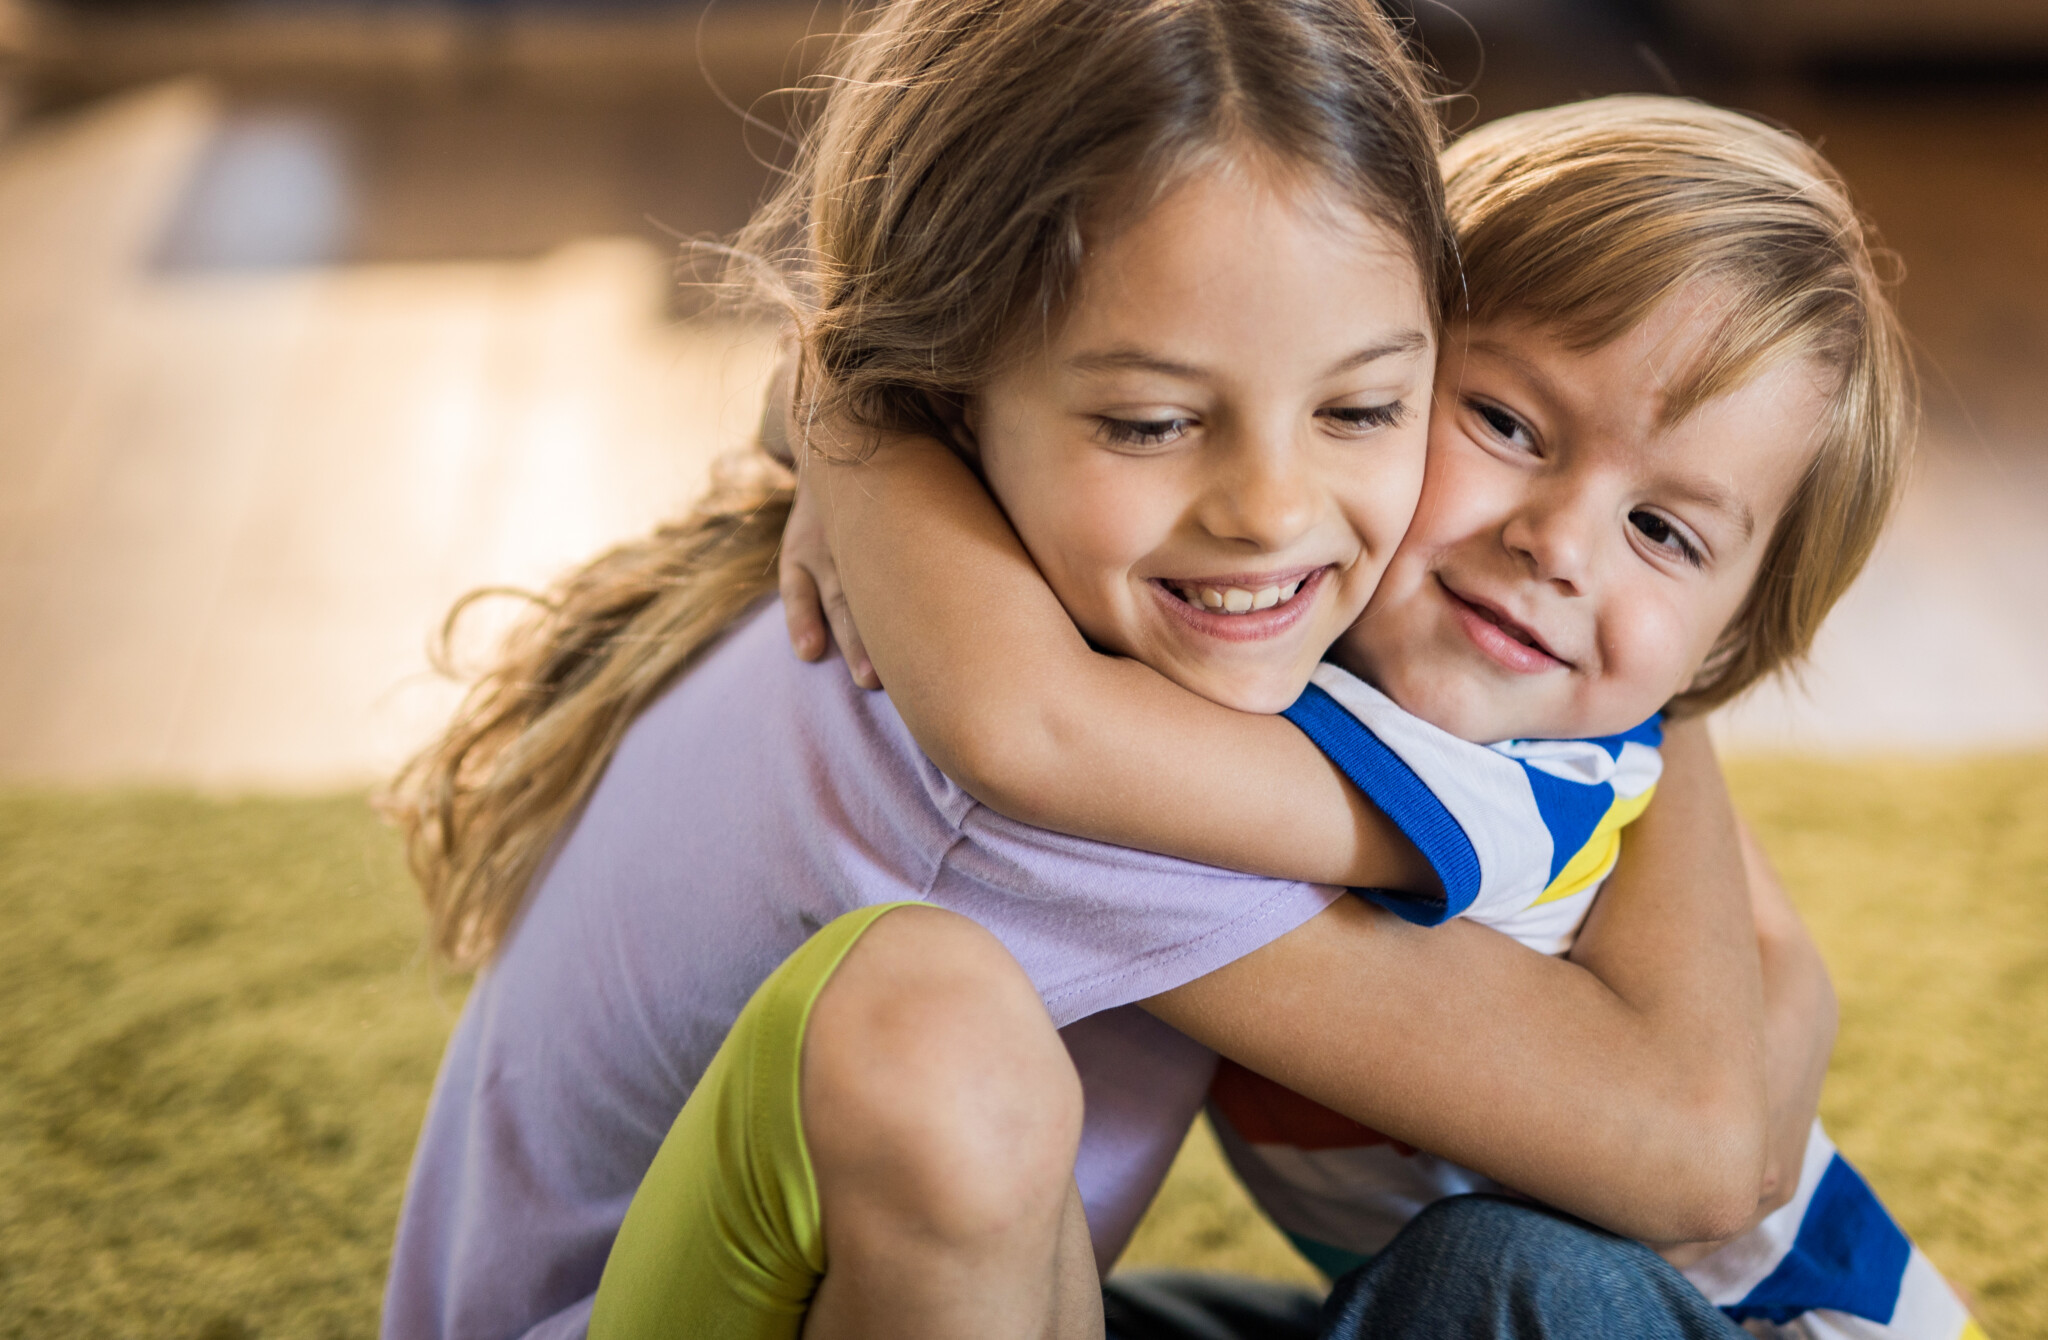 Schooling Kids in Kindness: The Wellness Connection - Spafinder